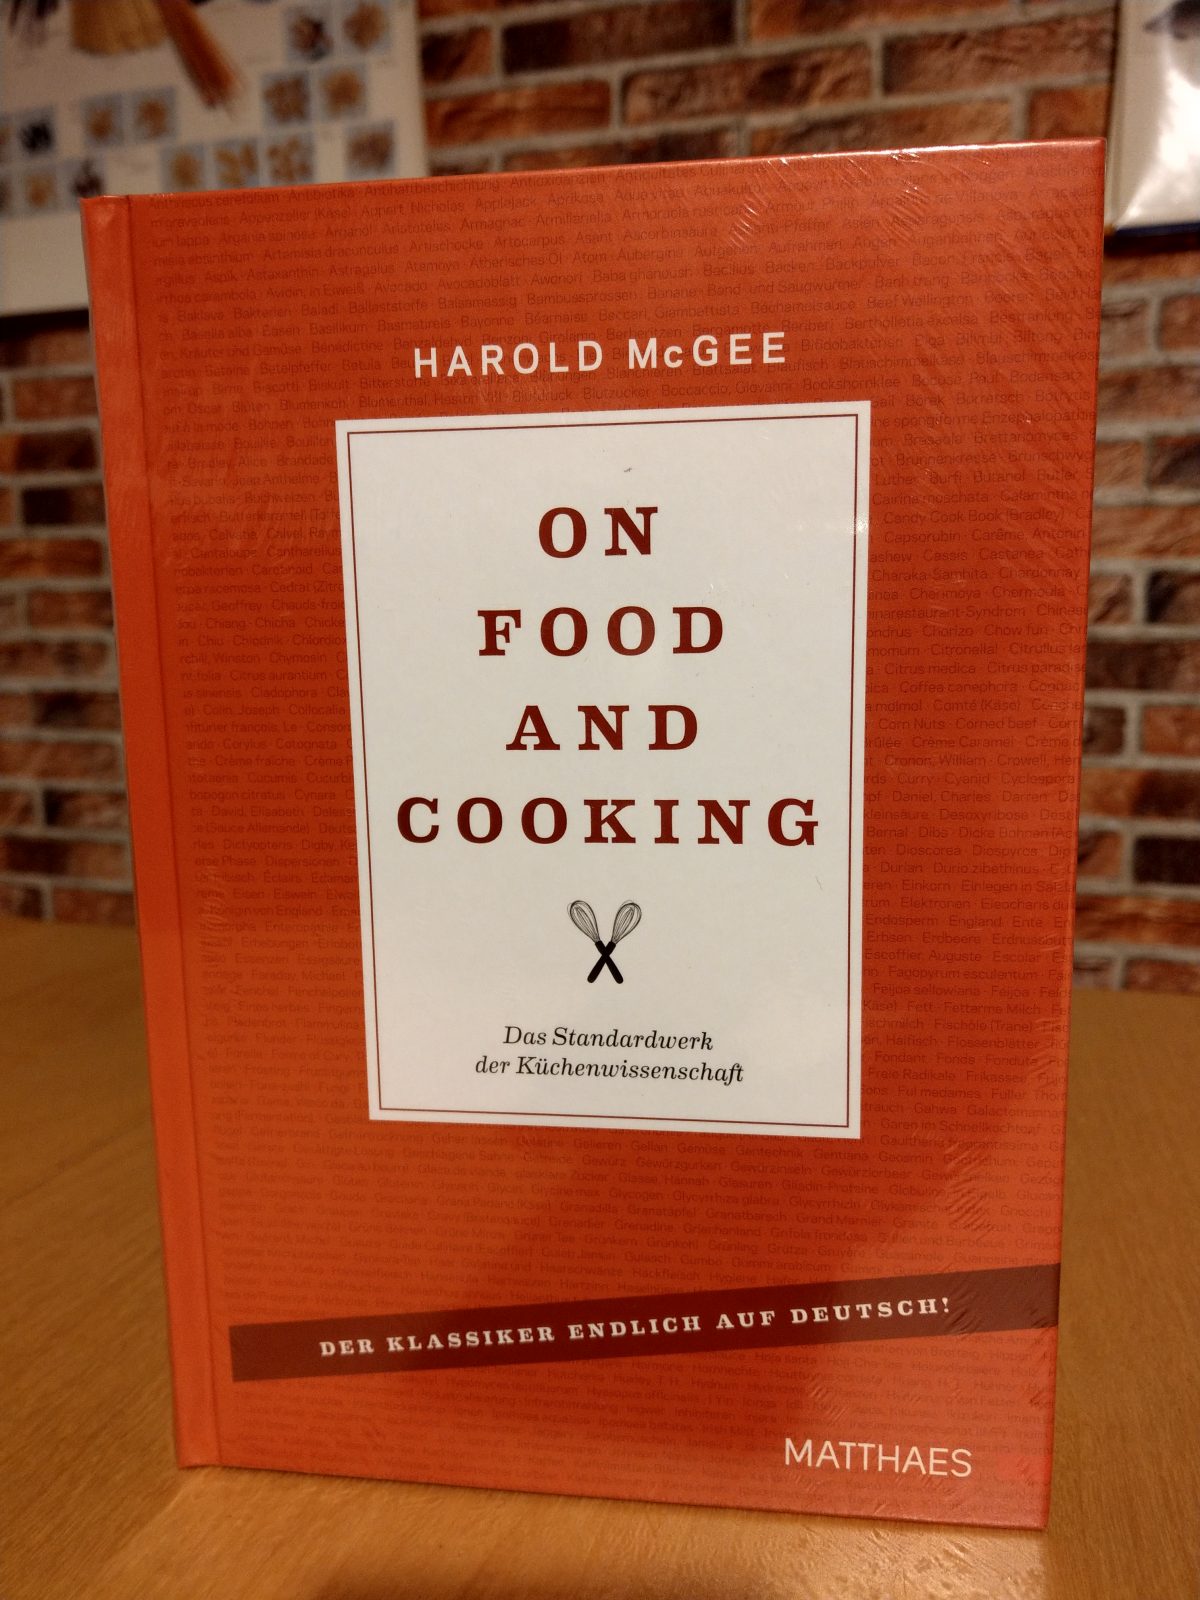 #Kochbuch-Kauf: „On Food and Cooking“ von Harold McGee